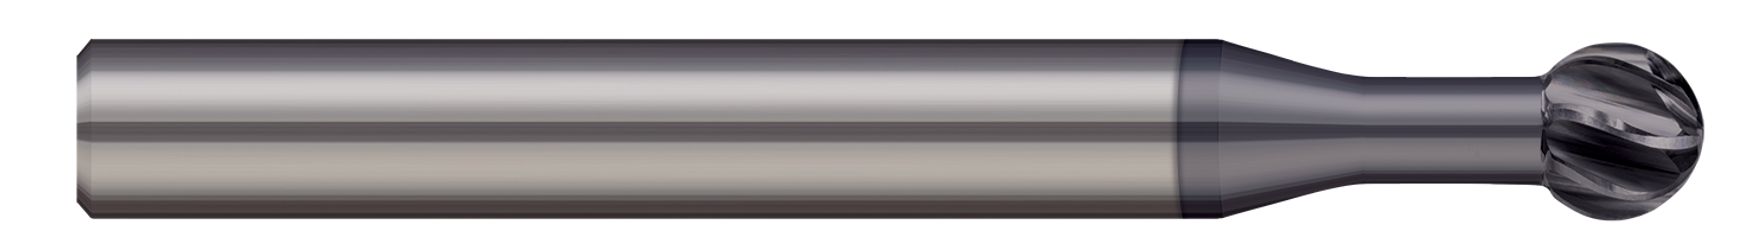 Undercutting End Mills-270°-For Hardened Steels